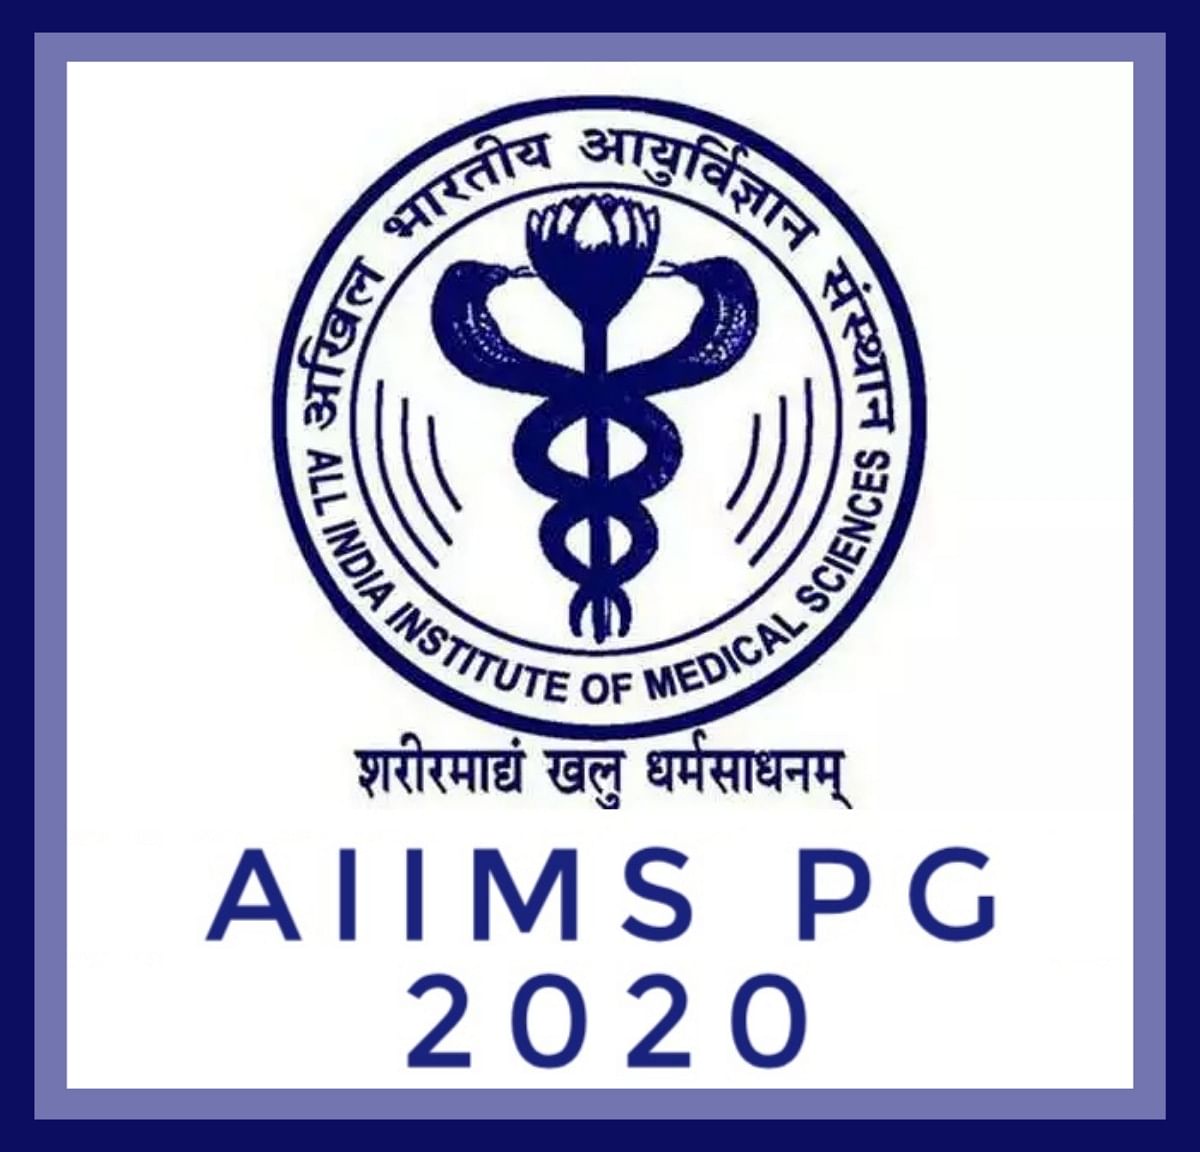 AIIMS PG 2020 Round 3 Counselling Result Declared, Steps to Check